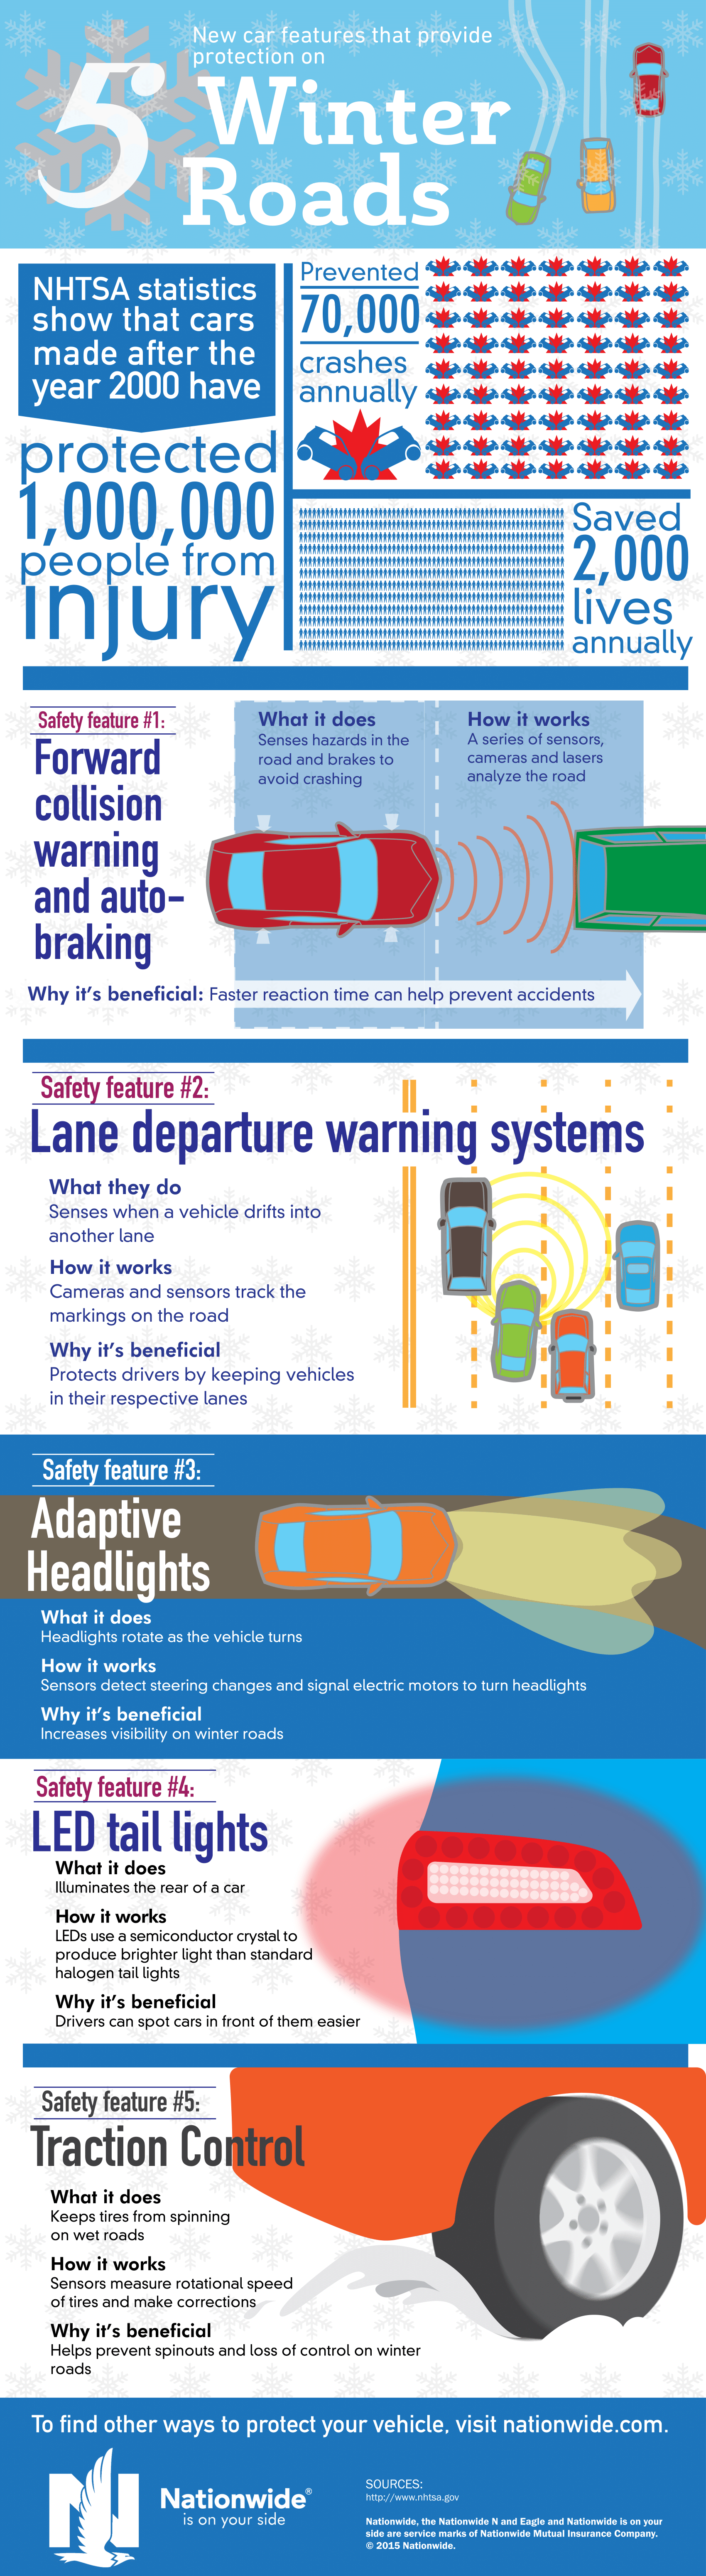 5 Car Features to Protect You on Winter Roads [Infographic]